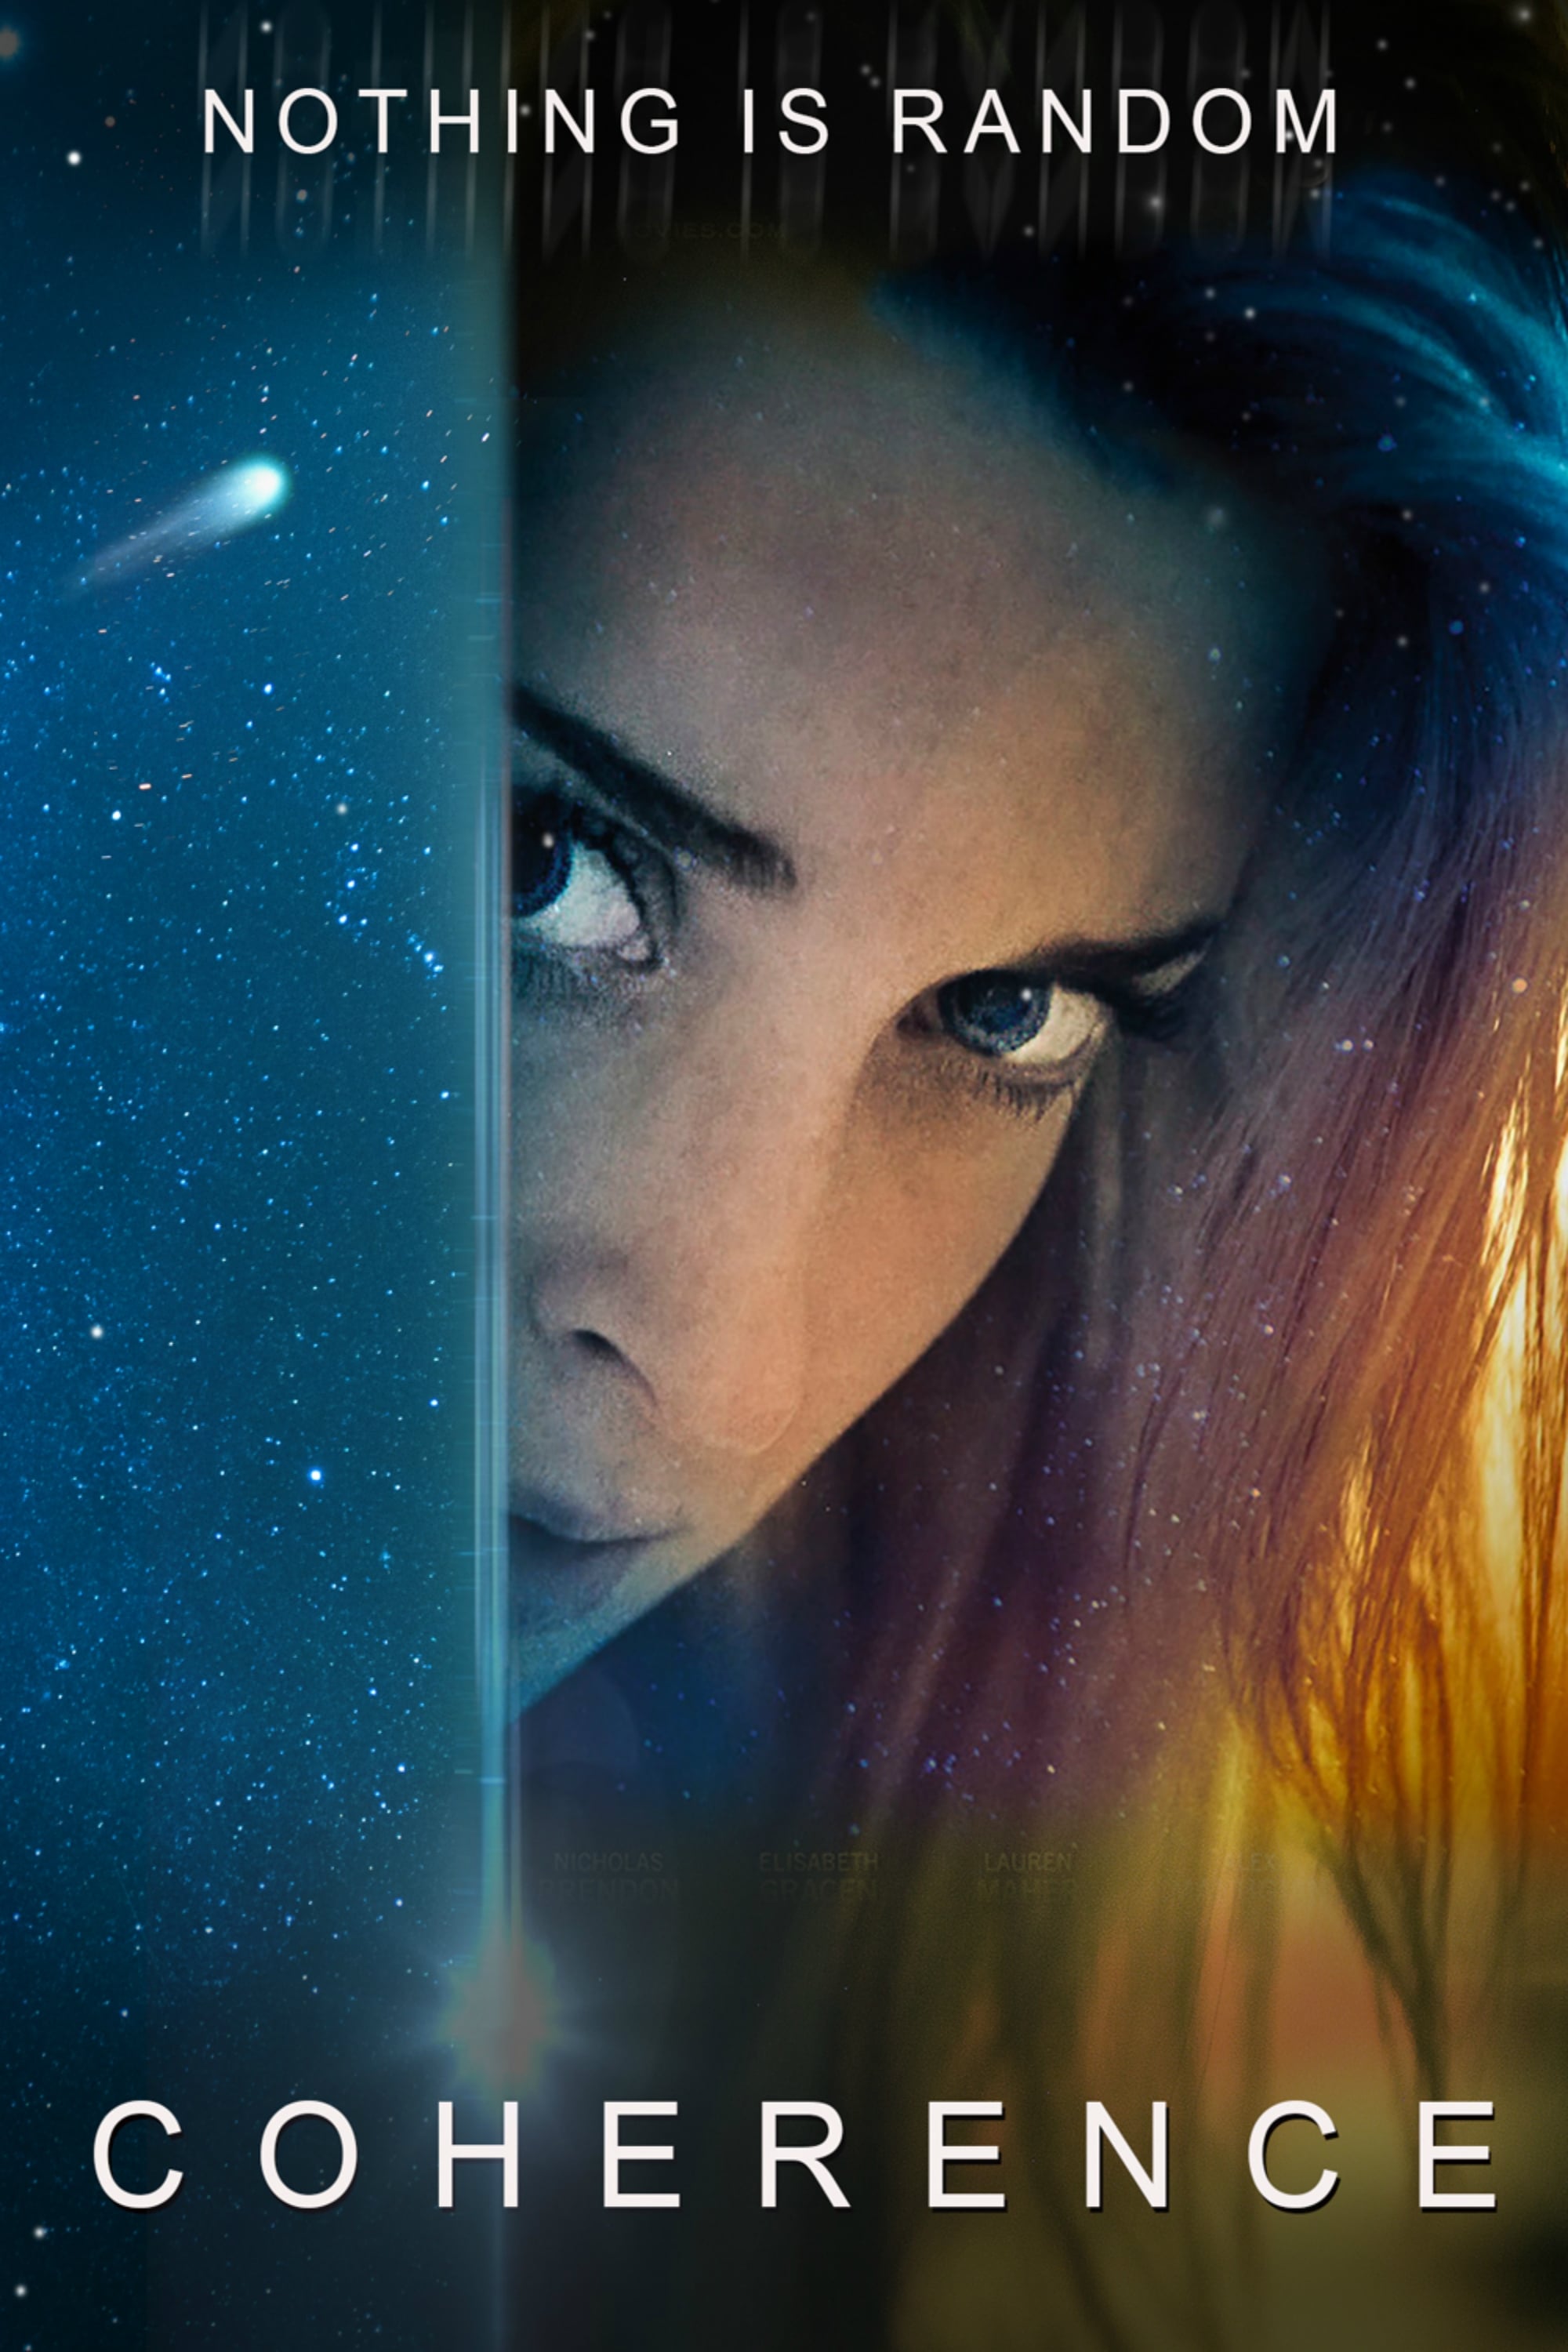 coherence-2013-posters-the-movie-database-tmdb